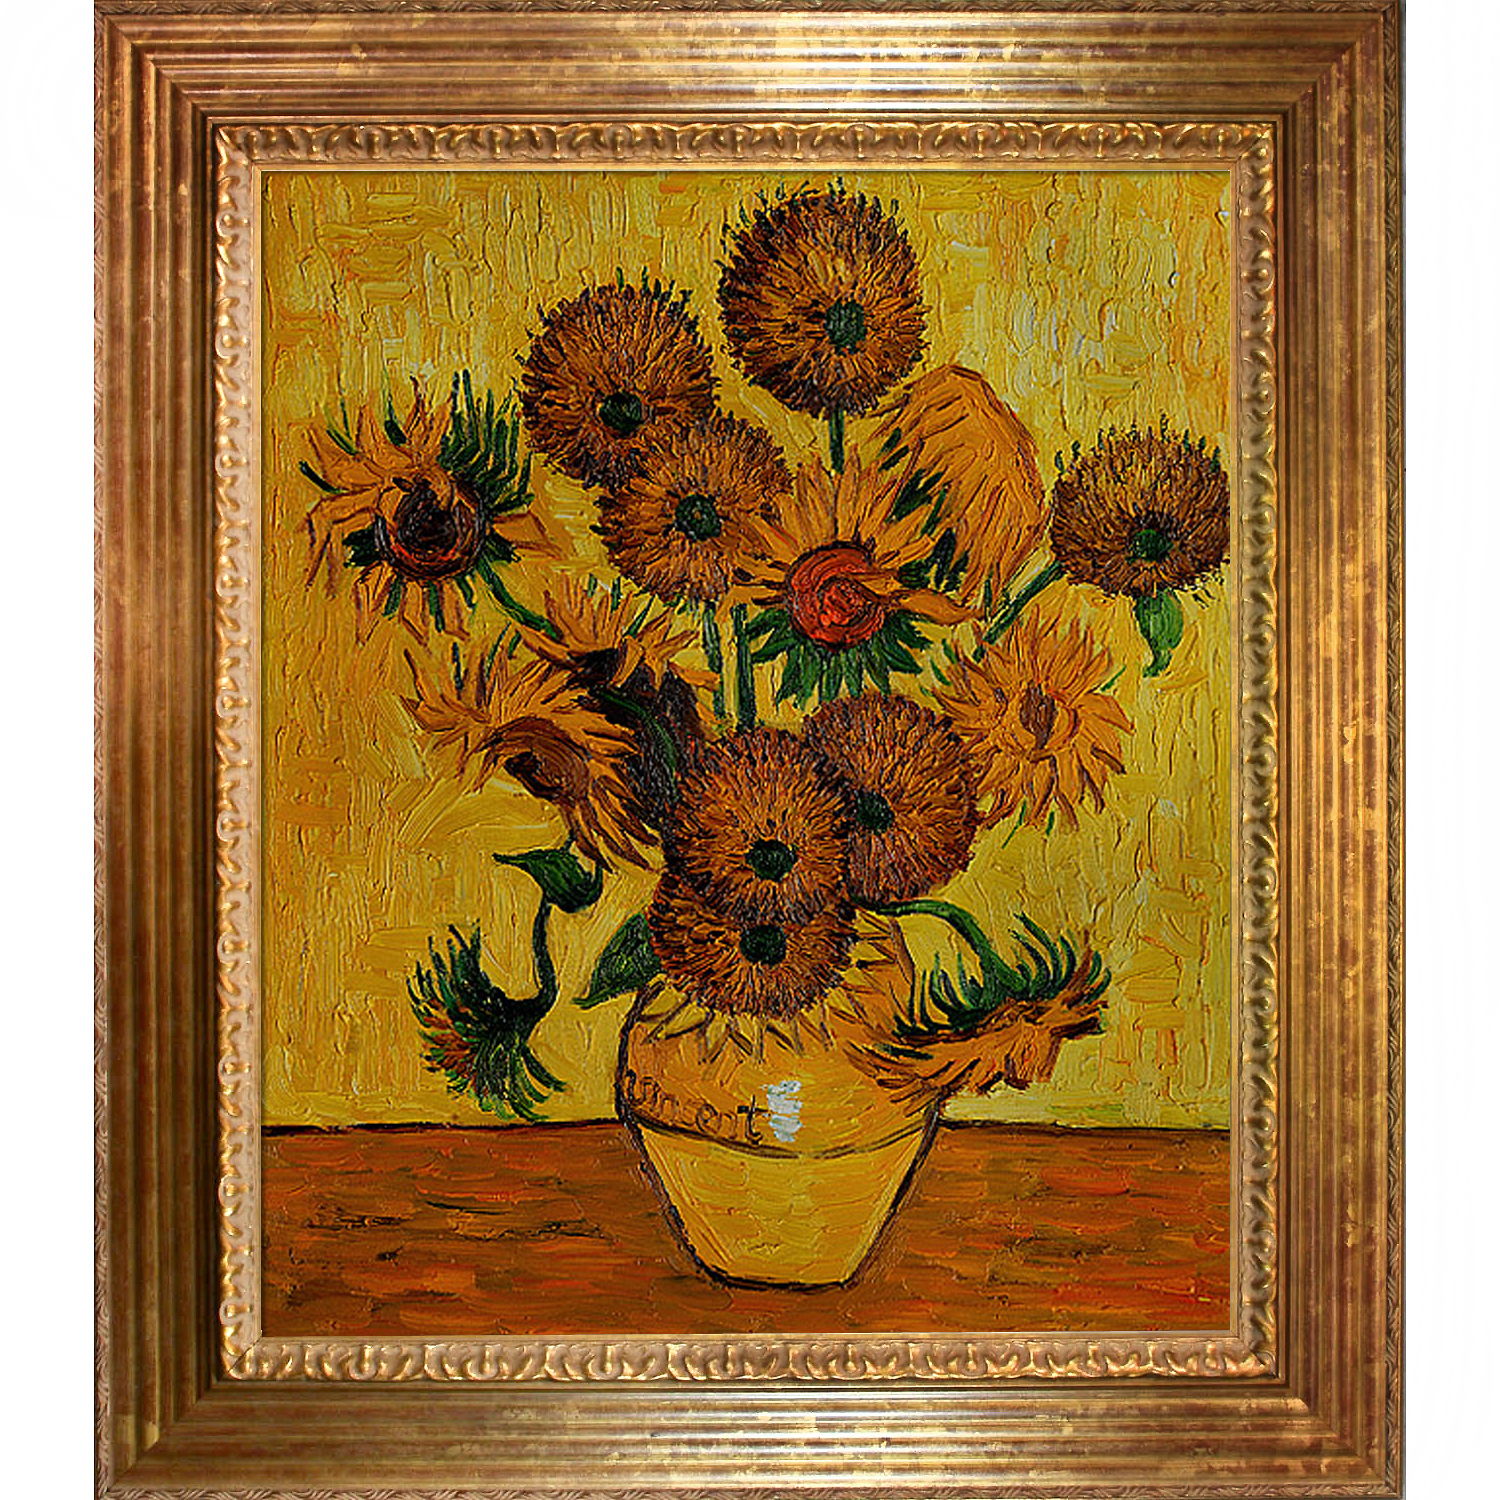 overstockArt.com Names the Top Five Most Popular Paintings for Spring 2013